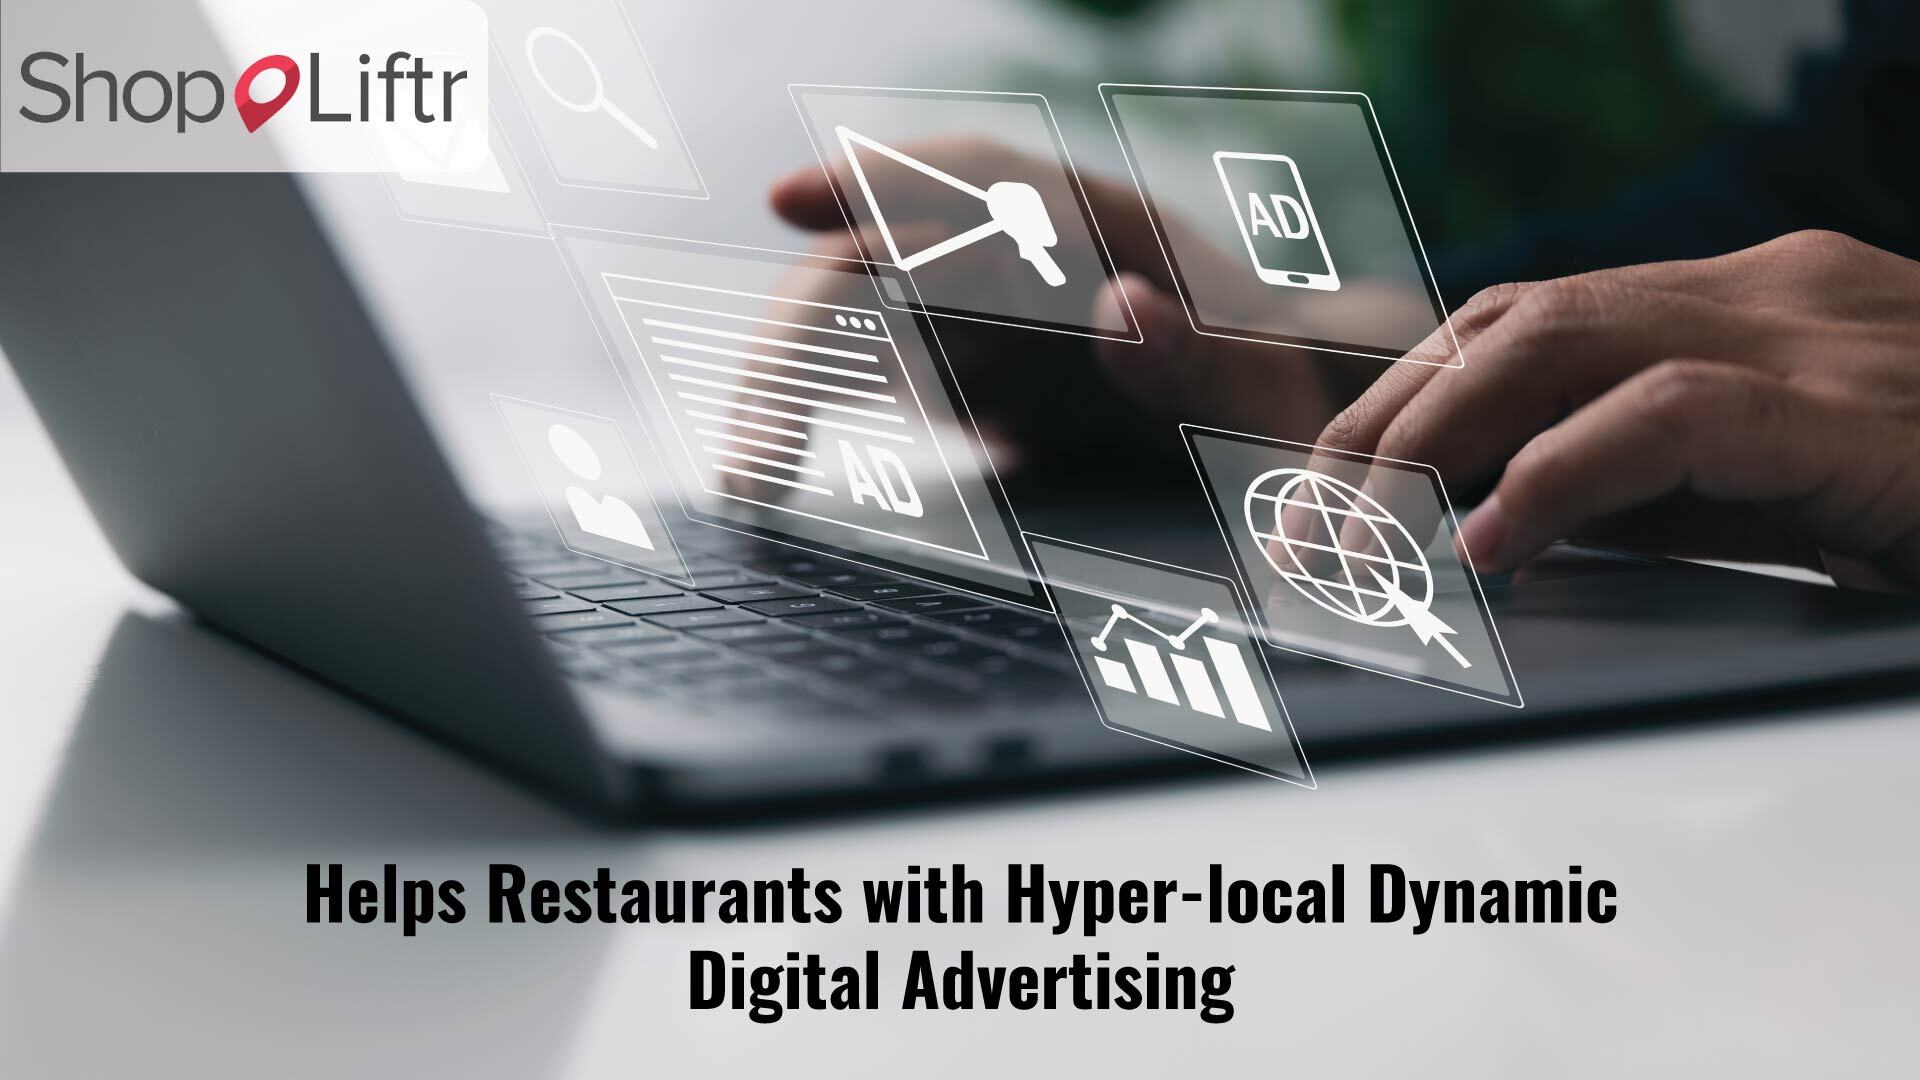 ShopLiftr Helps Restaurants Own the Occasion with Hyper-local Dynamic Digital Advertising